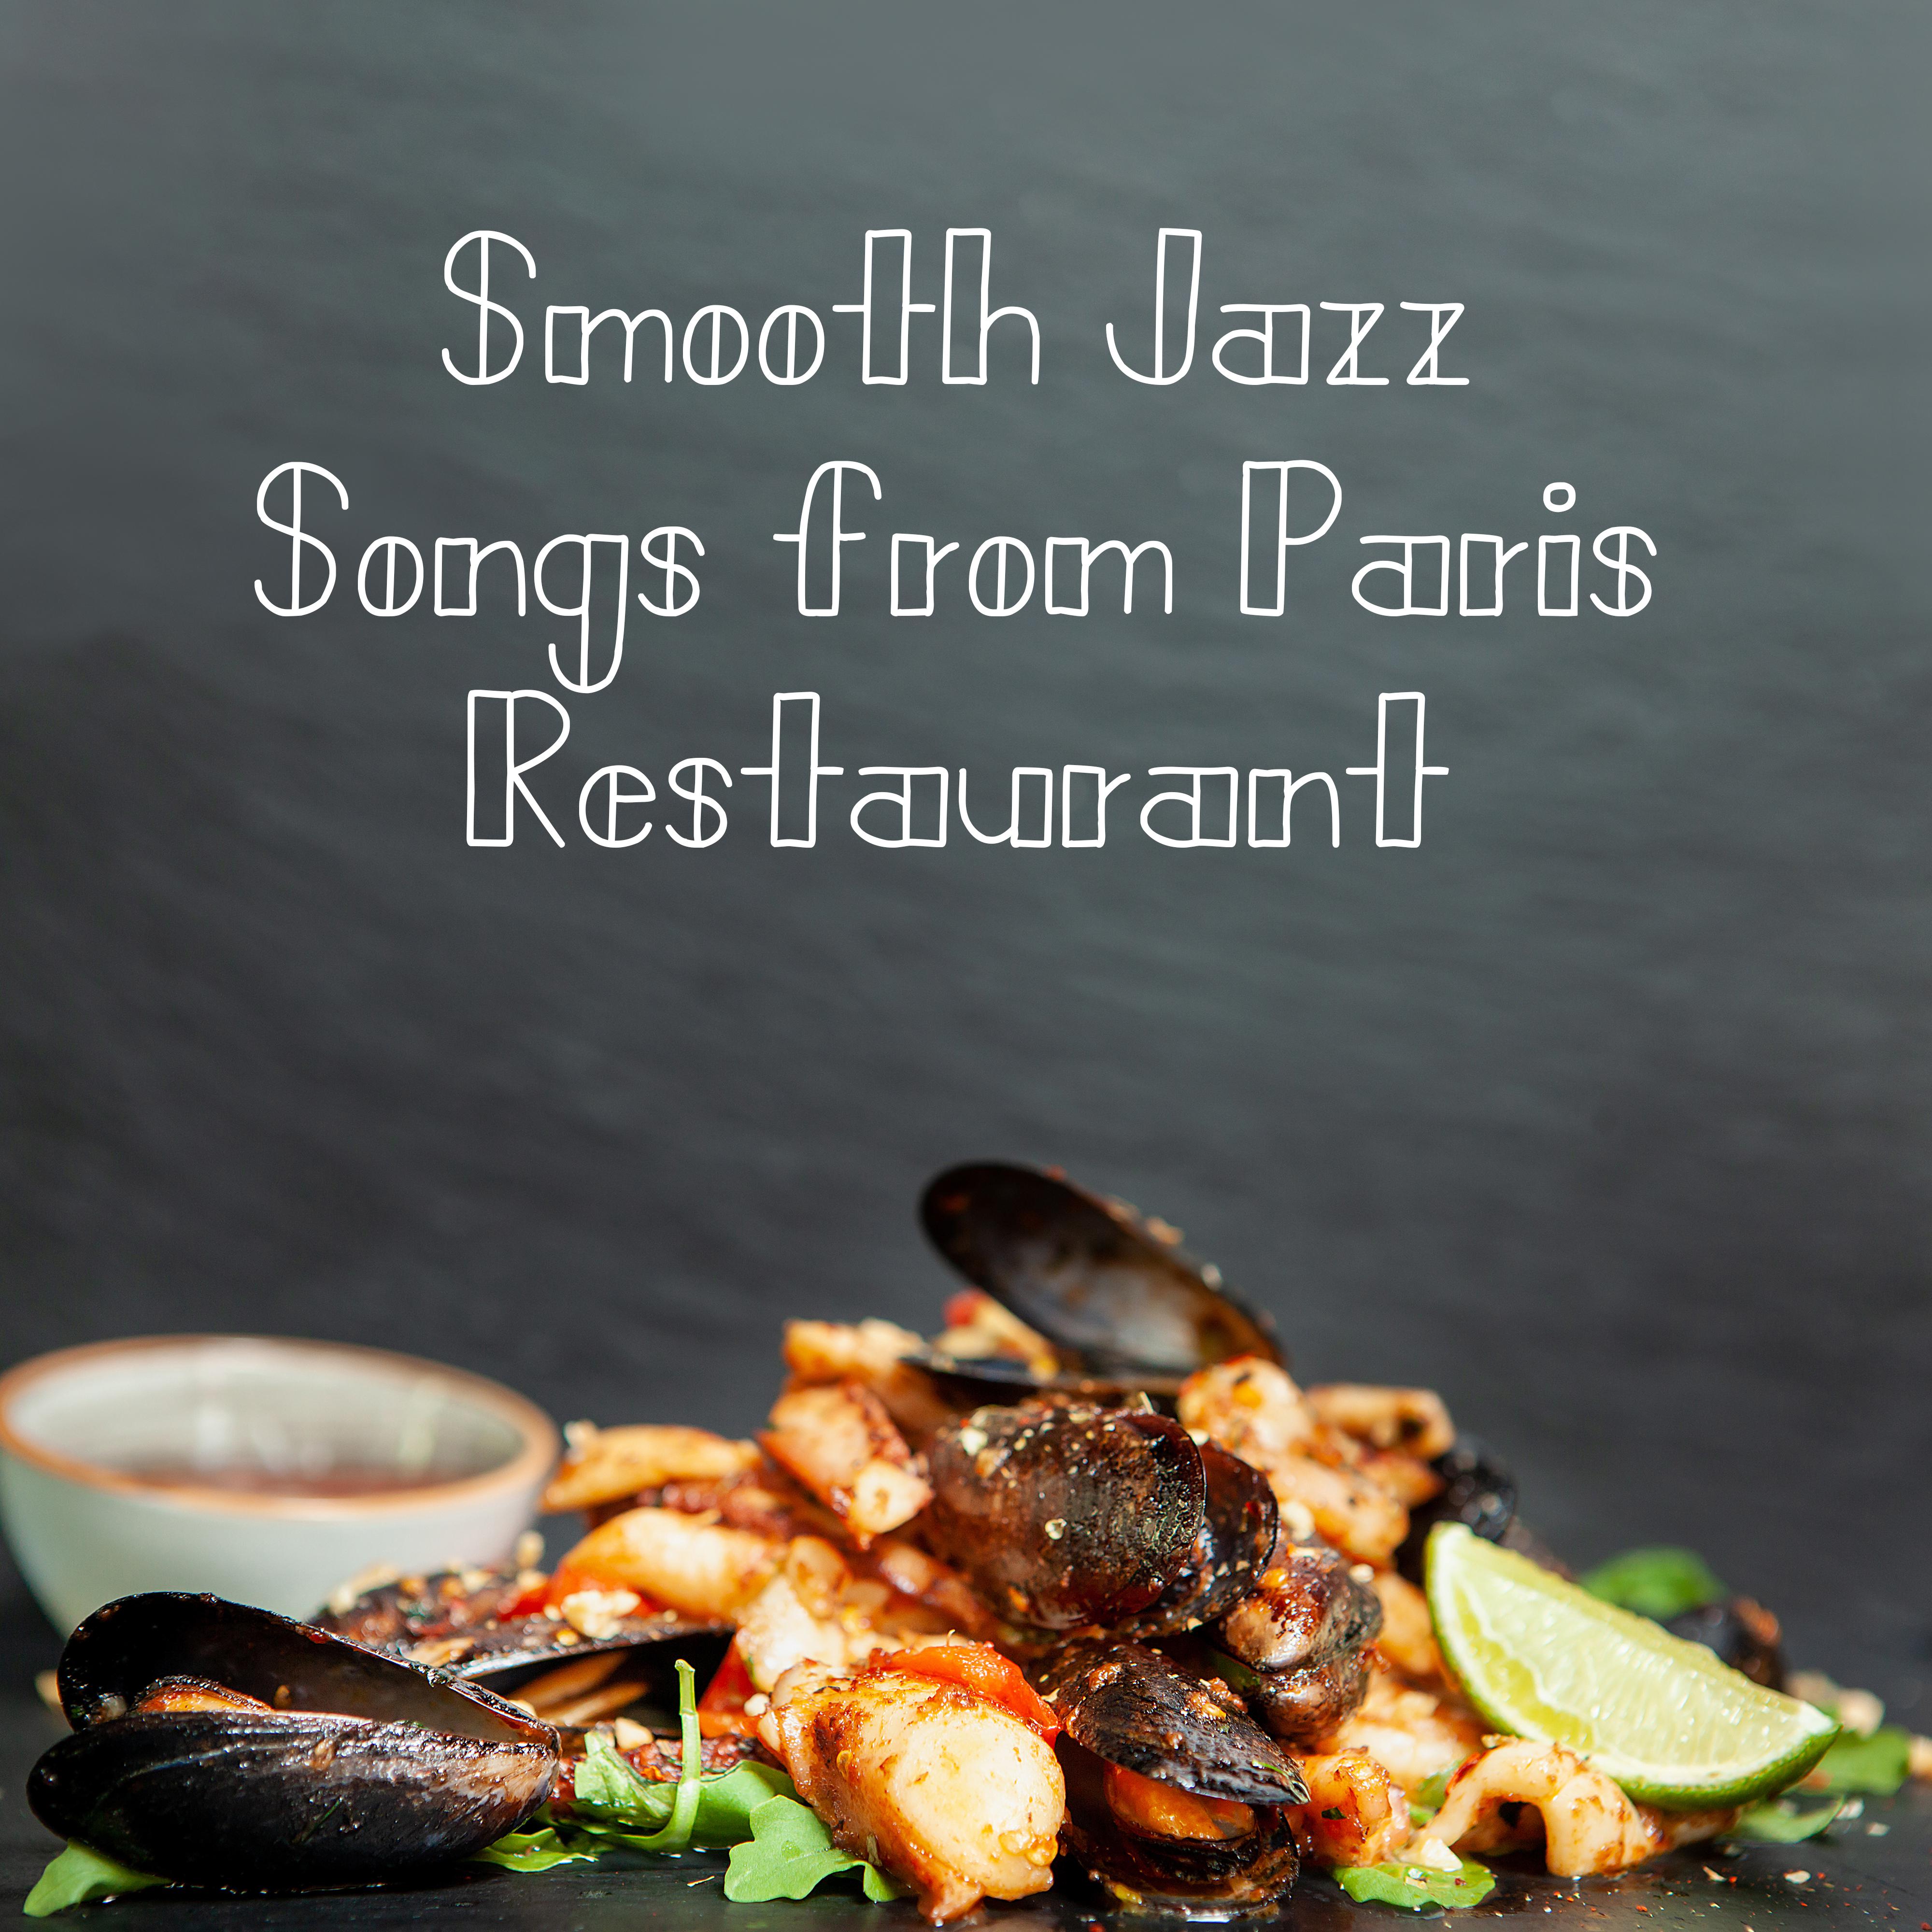 Smooth Jazz Songs from Paris Restaurant